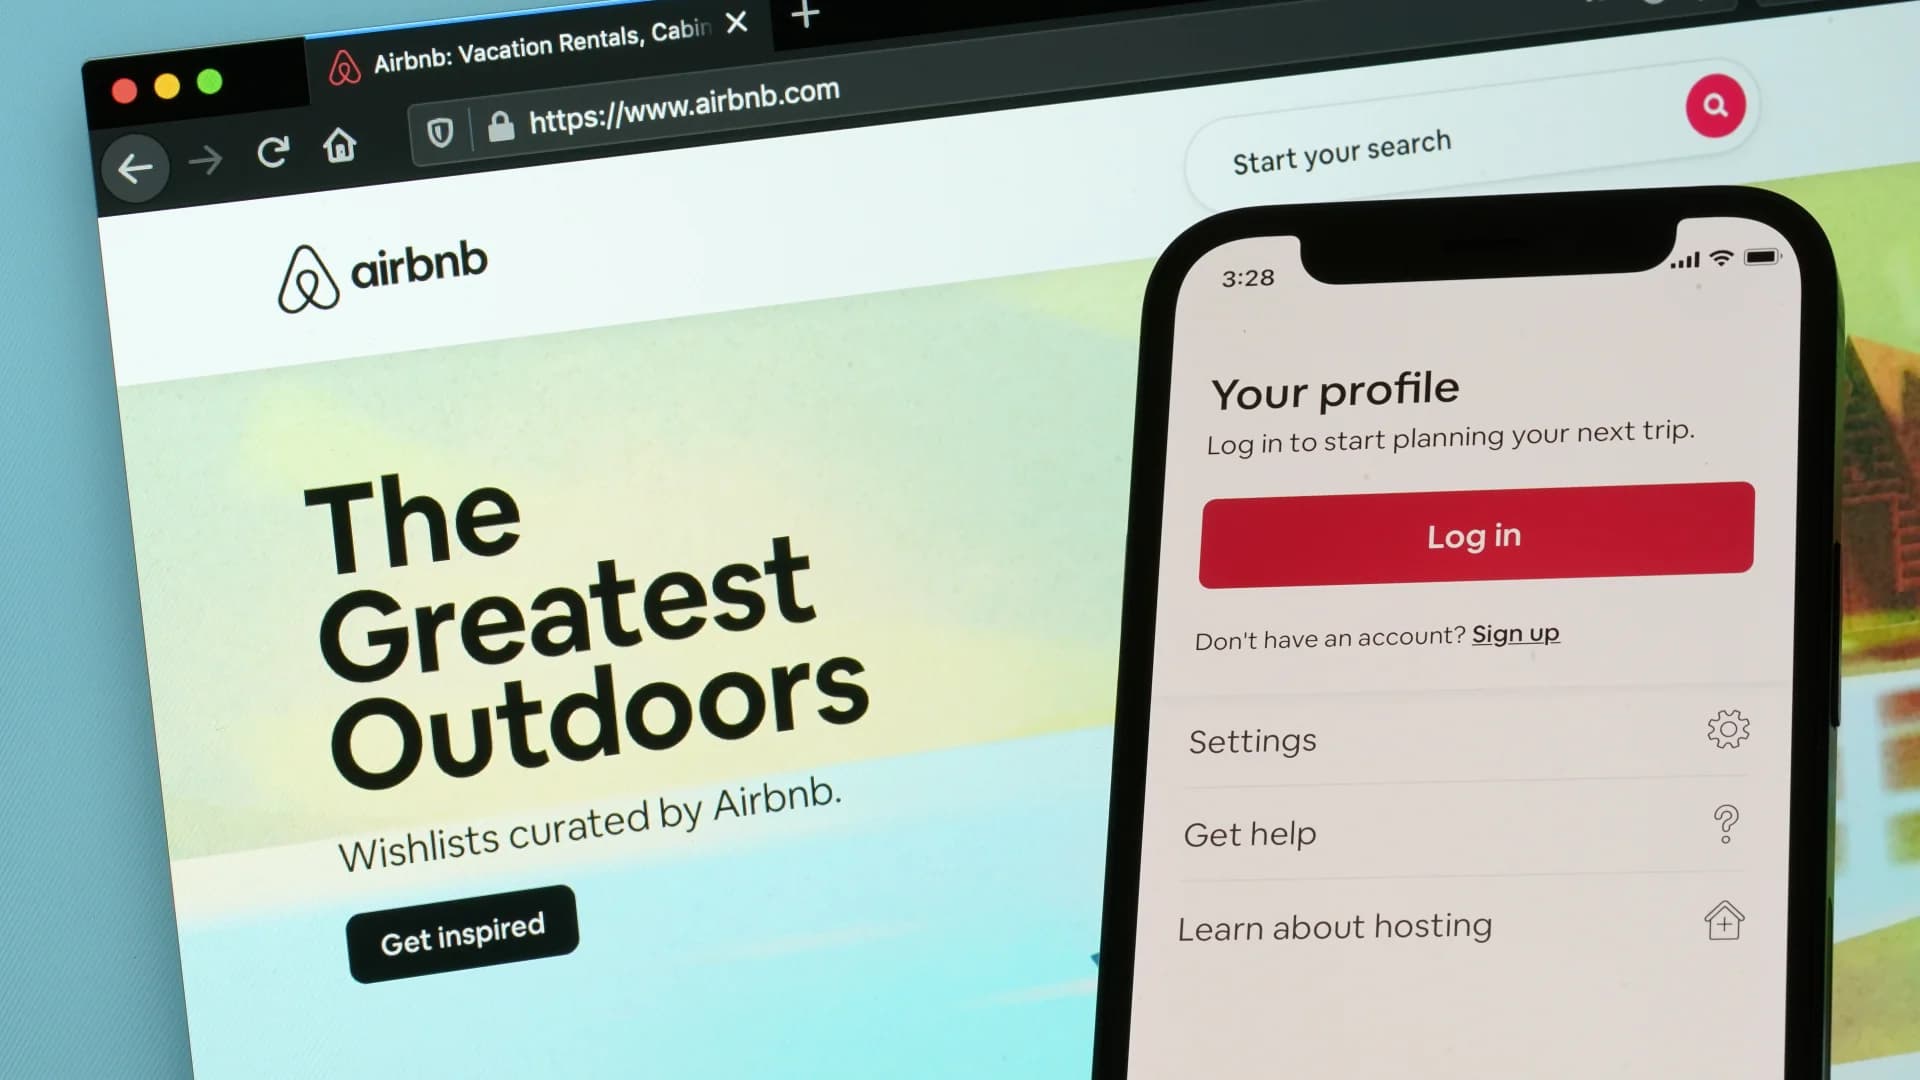 Are Airbnbs more cost-effective than hotels?